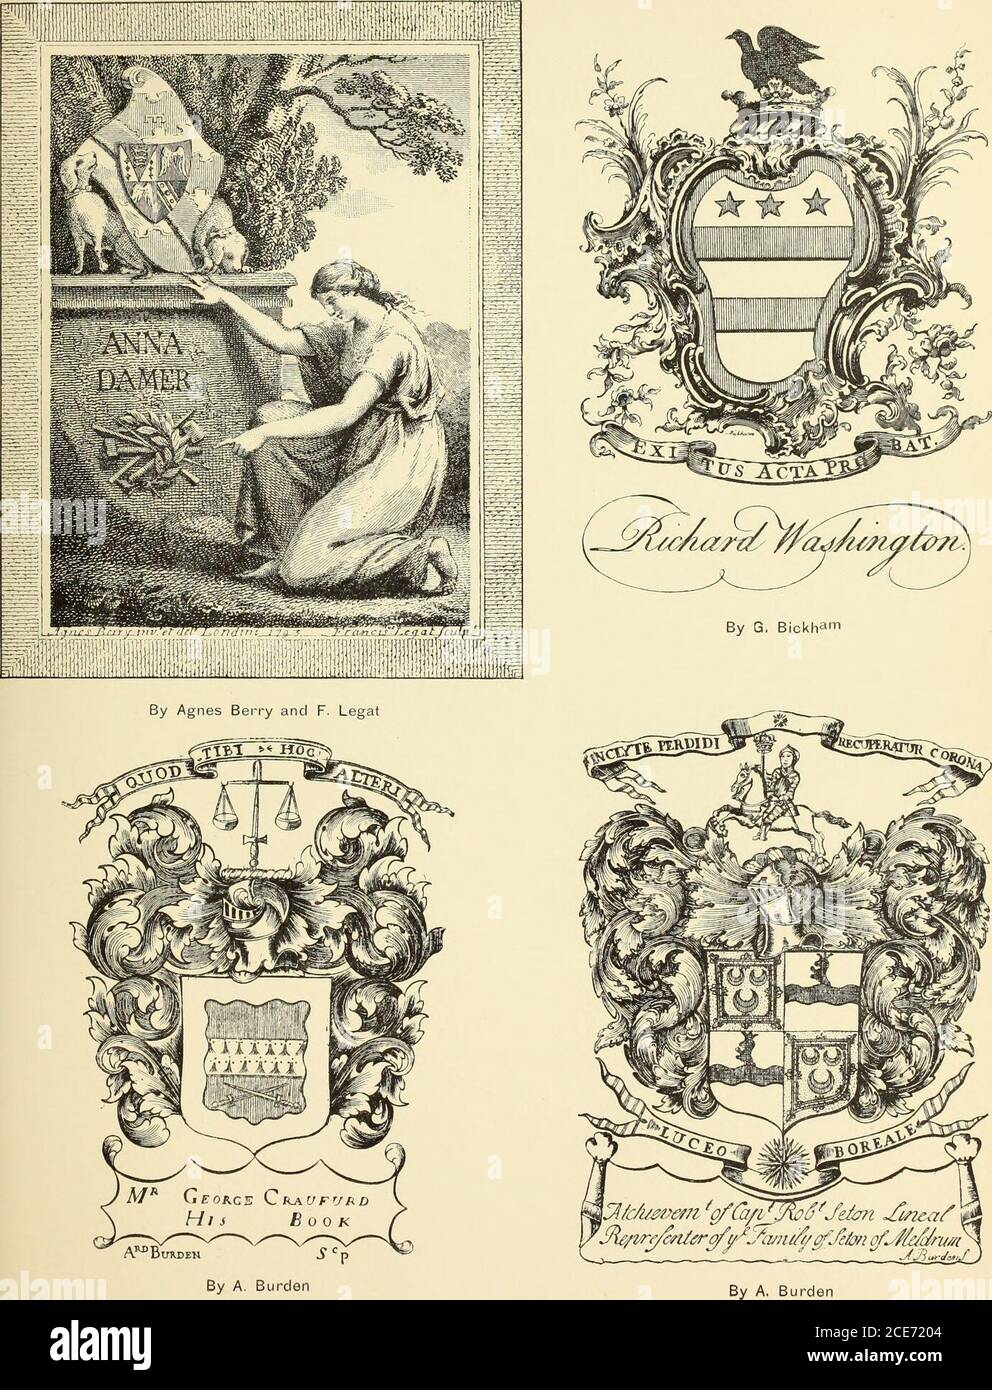 . Artists and engravers of British and American book plates : a book of reference for book plate and print collectors . t^nip. 1770 dhhii^o yrxtj^ uiiiLcu OL»iLCo. see Cr. C omitn £31110 W Mich. H. Fitzpatrick BlllOW sc. J. cbLOUIl 1 / ou Birch (Miss) B. A. Heywood Pictorial Bird, Boston, United States. See E. D. French Bird (C.) Edward Greenfield Doggett & Hugh Greenfield Doggett C. Bird 1093 Pictorial 1893 uiiicii, -L.U11UU11. see 1. btotnara Black (T.), Calcutta C. Layton Engraved by T. Black. Cal. Armorial 1820 Blades and Co. (William), London Salomans Bequest, 1873, Library of the Corpora Stock Photo